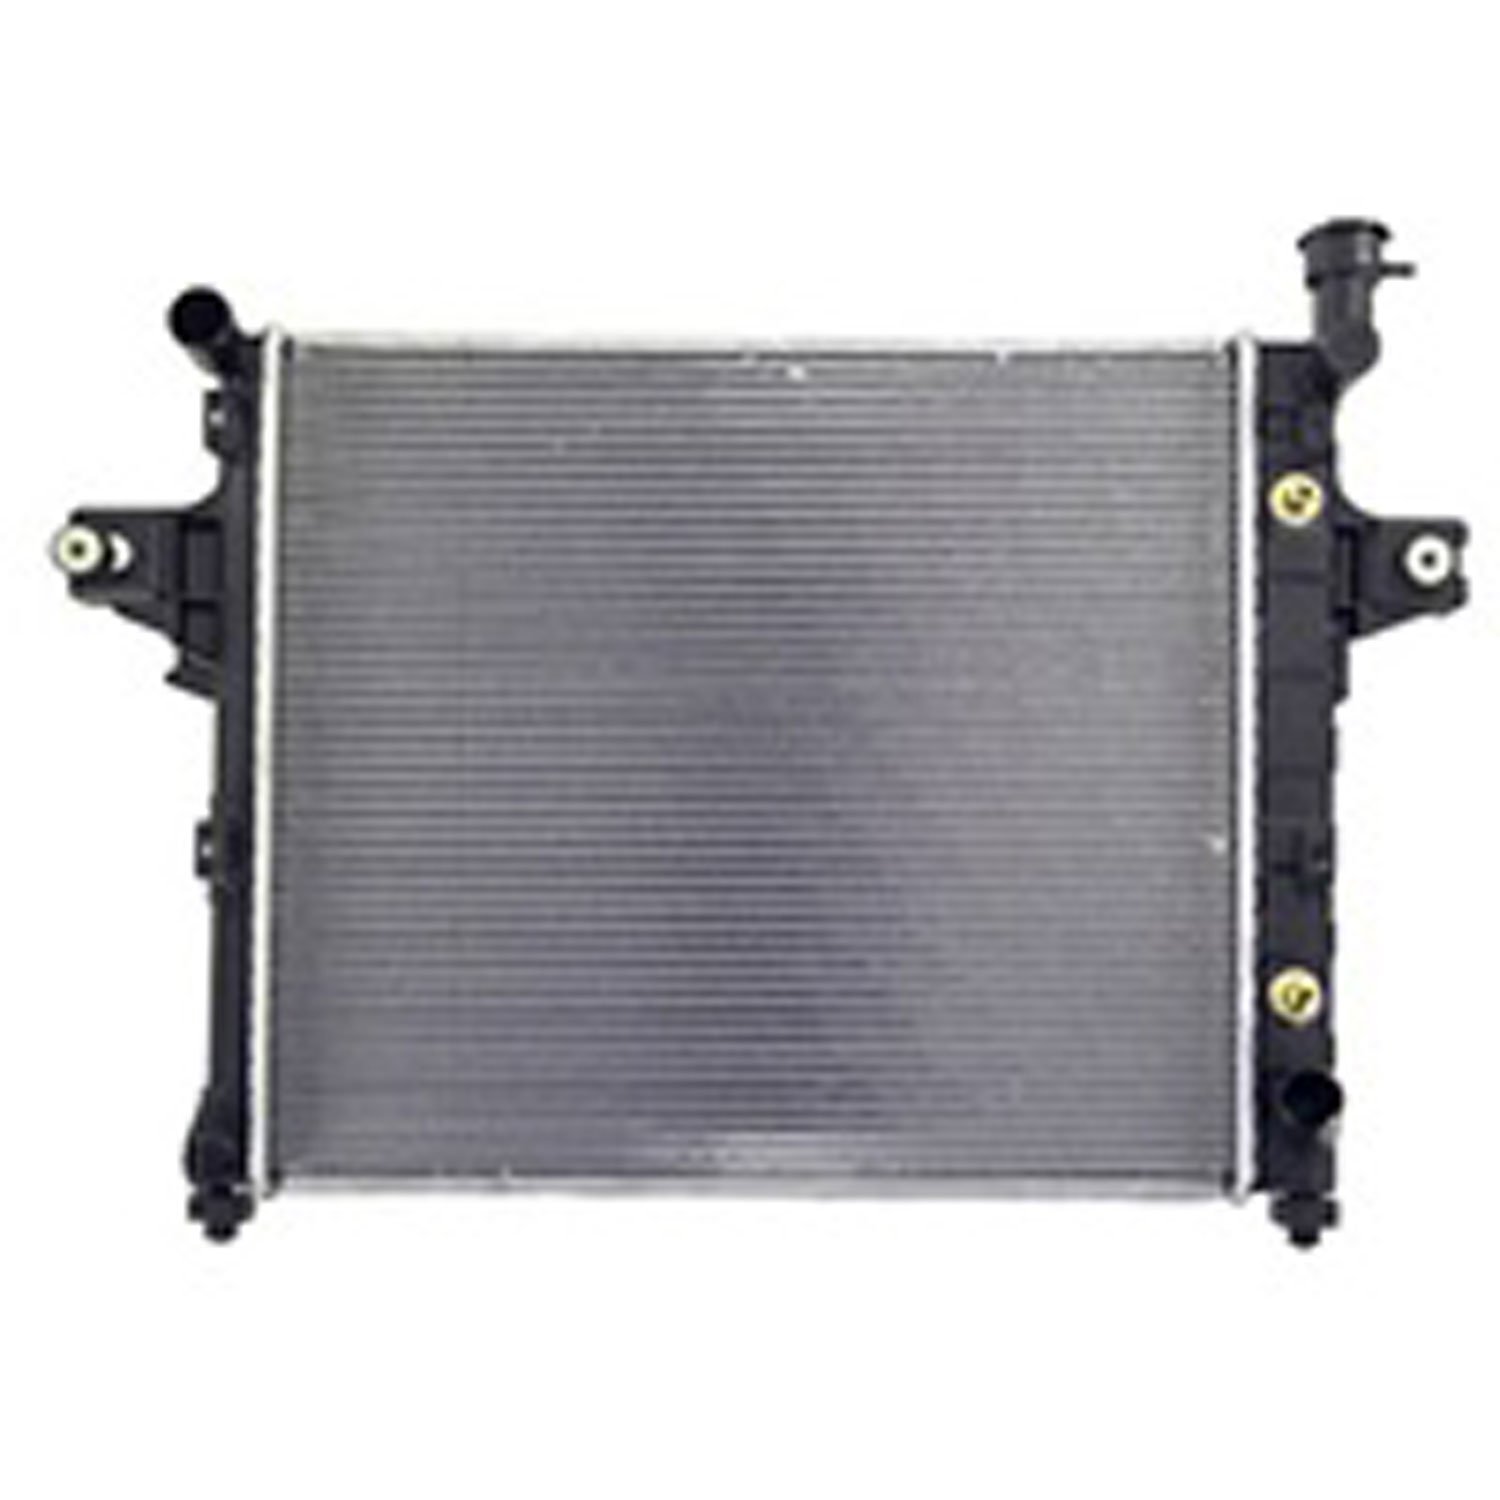 This 1 row radiator from Omix-ADA fits 01-04 Grand Cherokee 4.7L with or without AC.